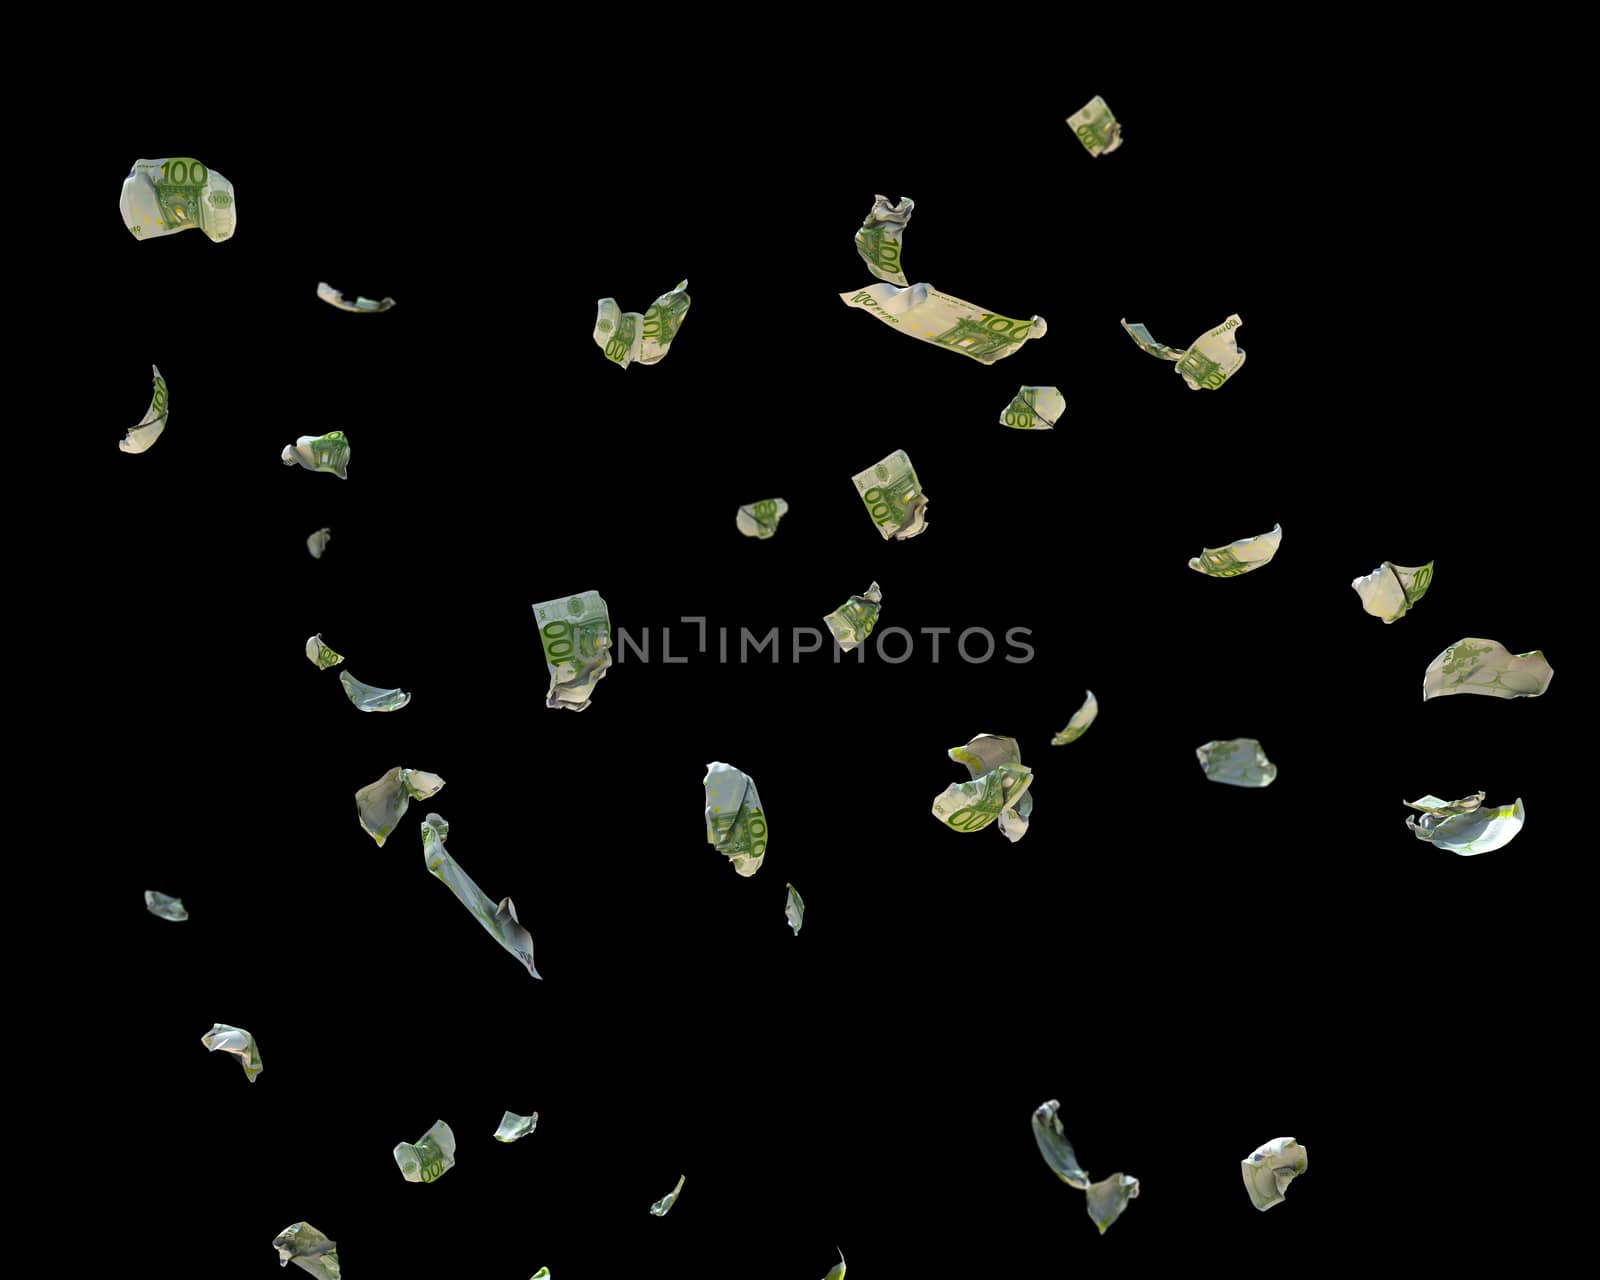 100 Euro Currency Crumpled Banknotes flying, against black, clipping path included